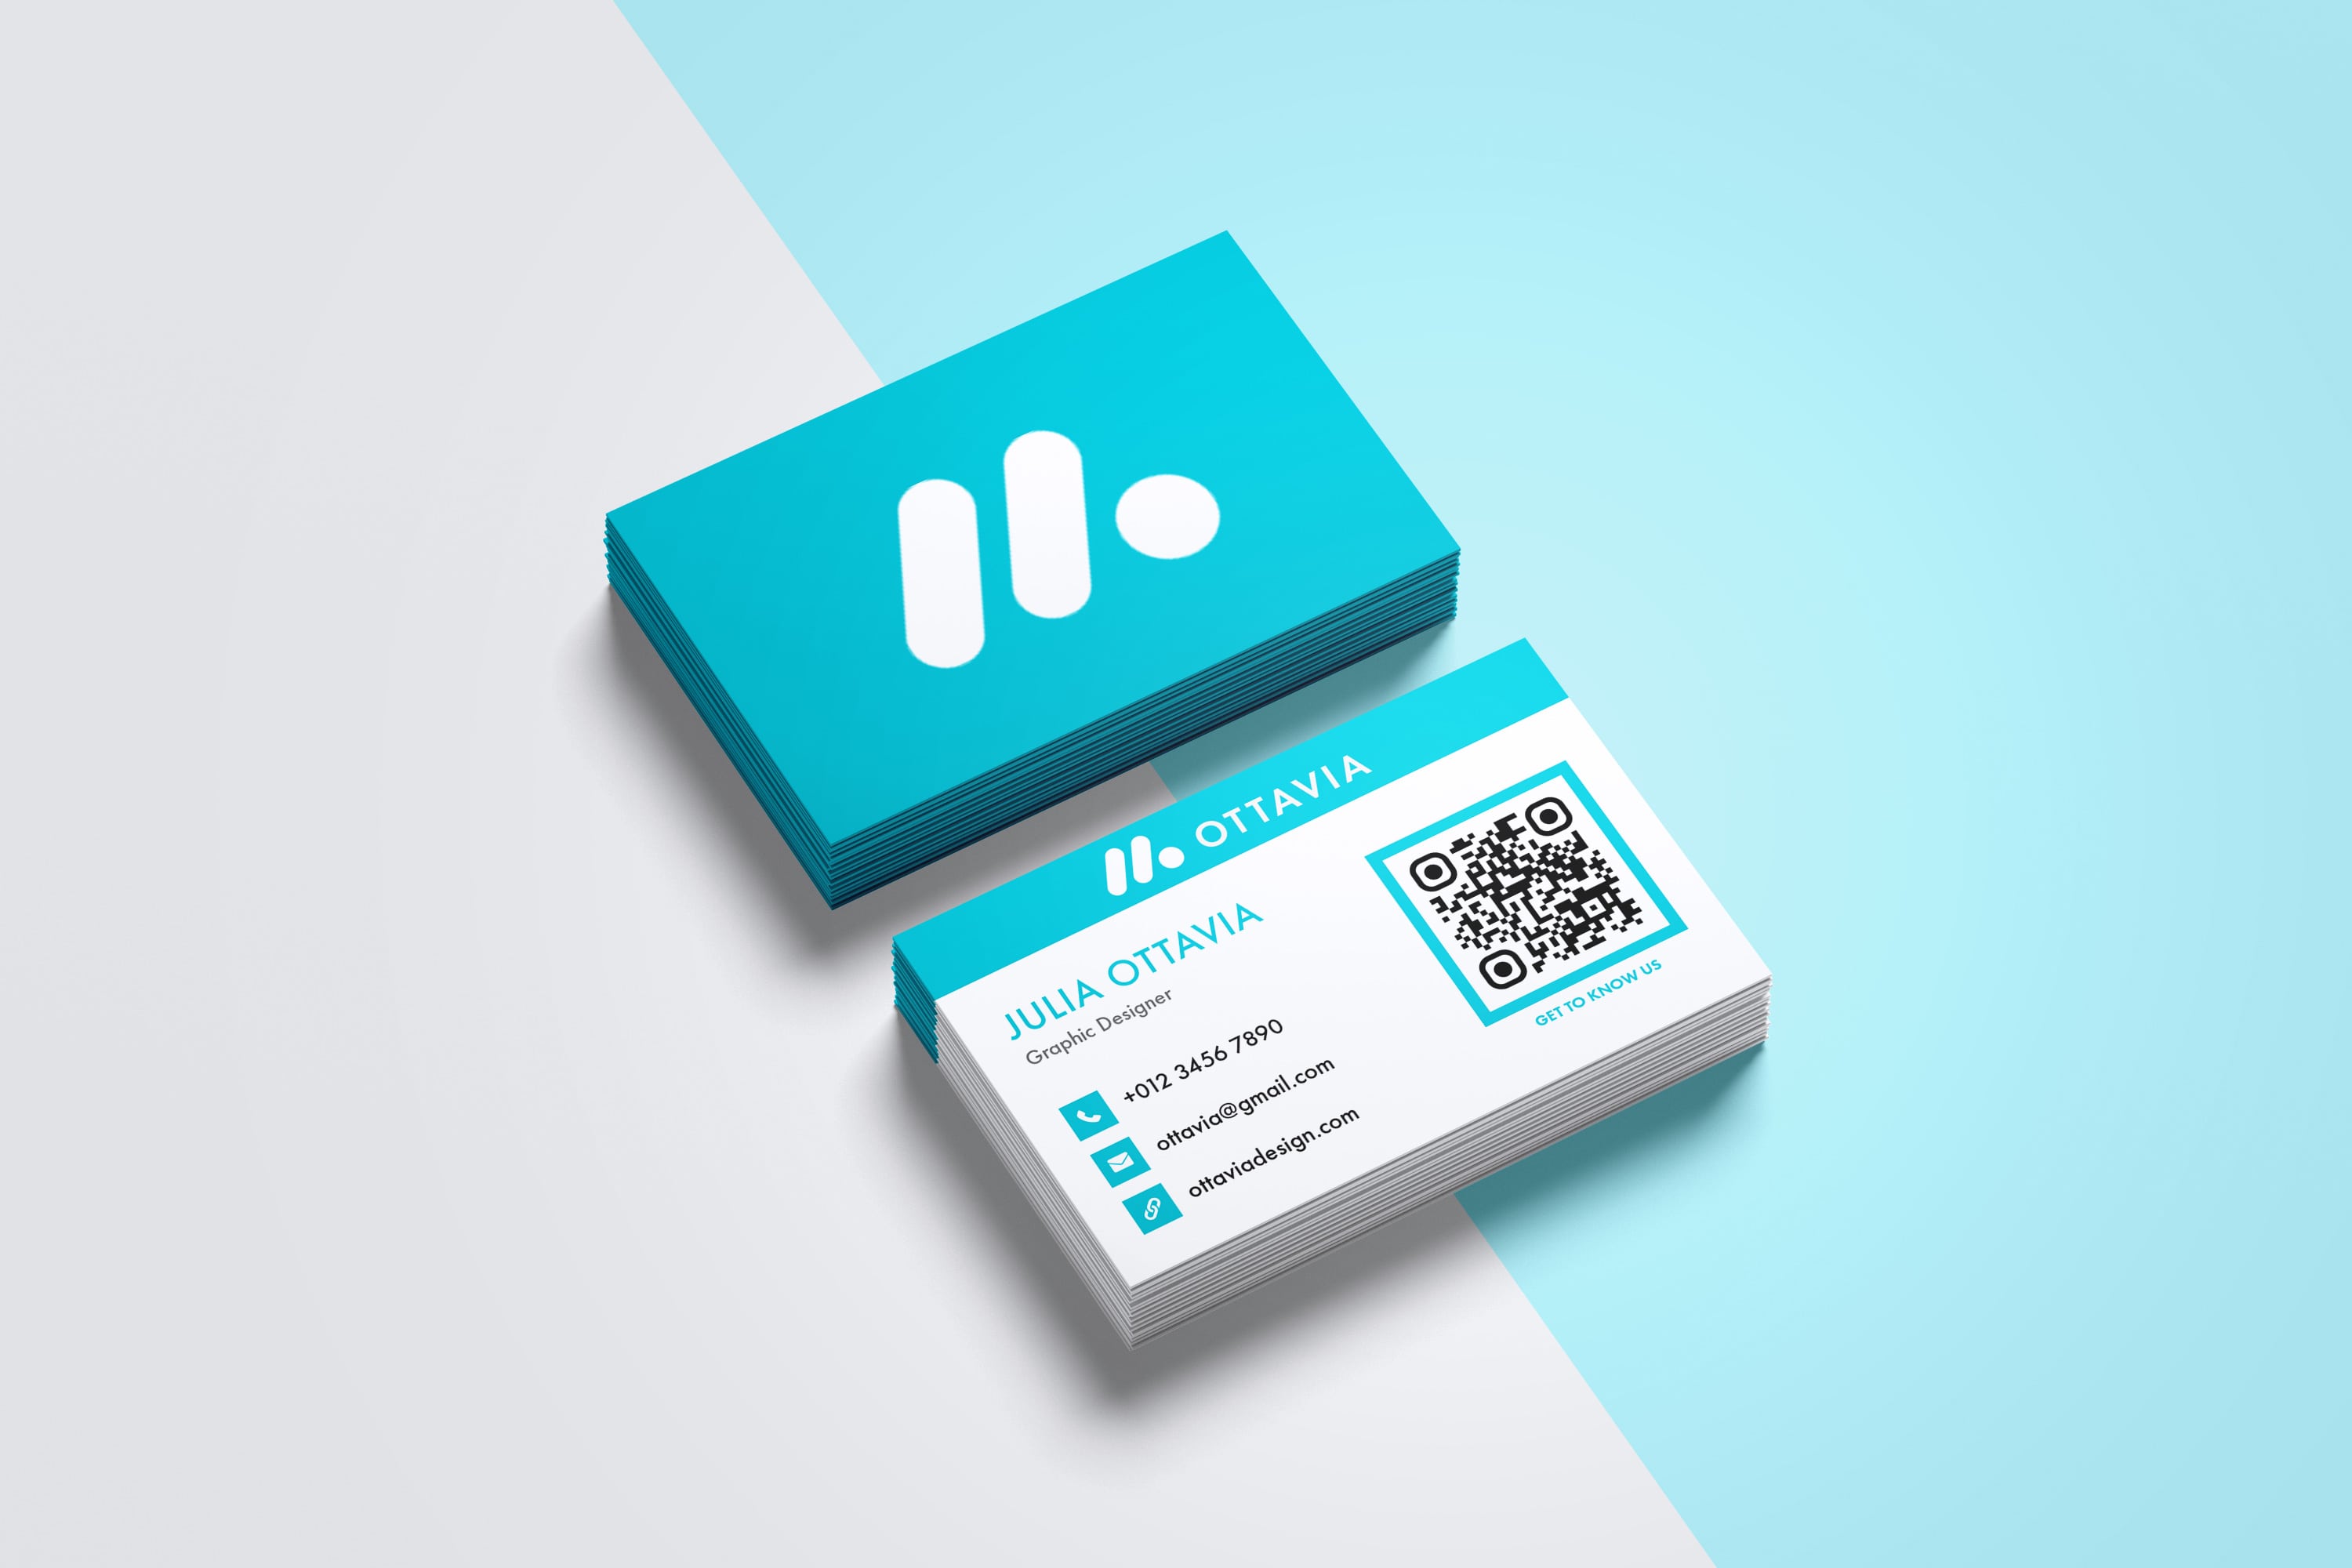 Business Cards Enhanced with QR Codes